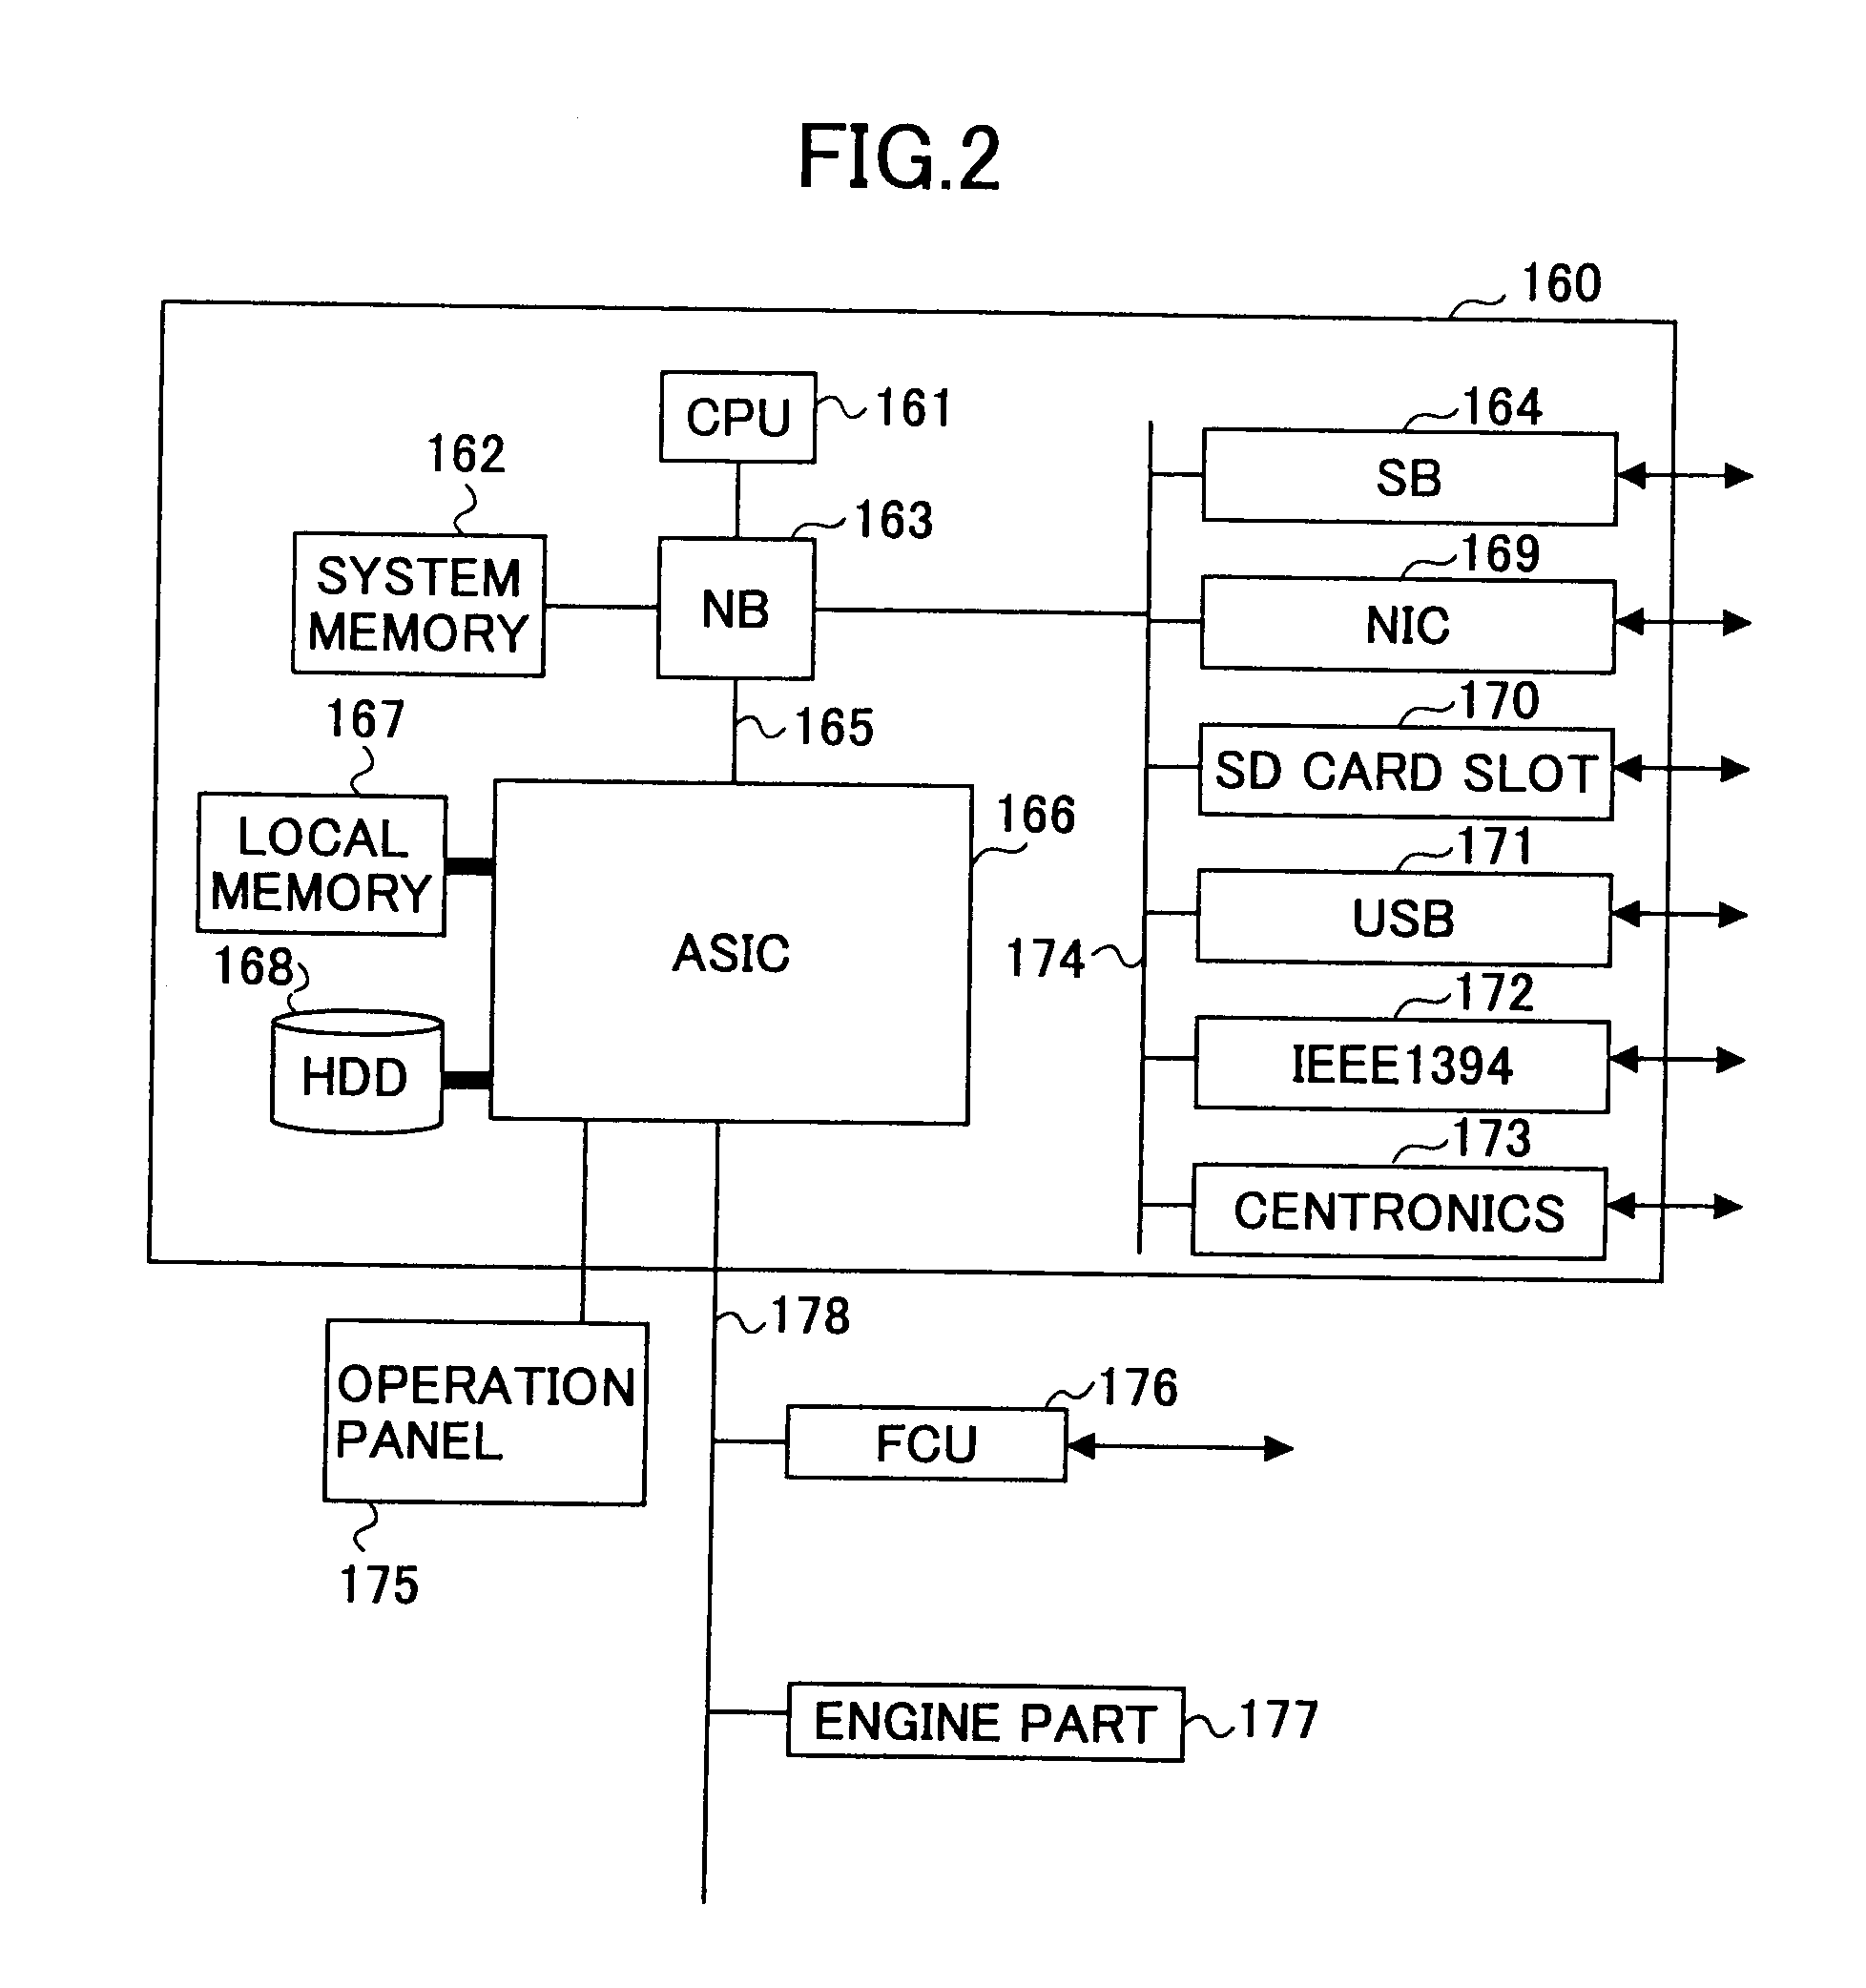 Image forming apparatus and methods used in the image forming apparatus